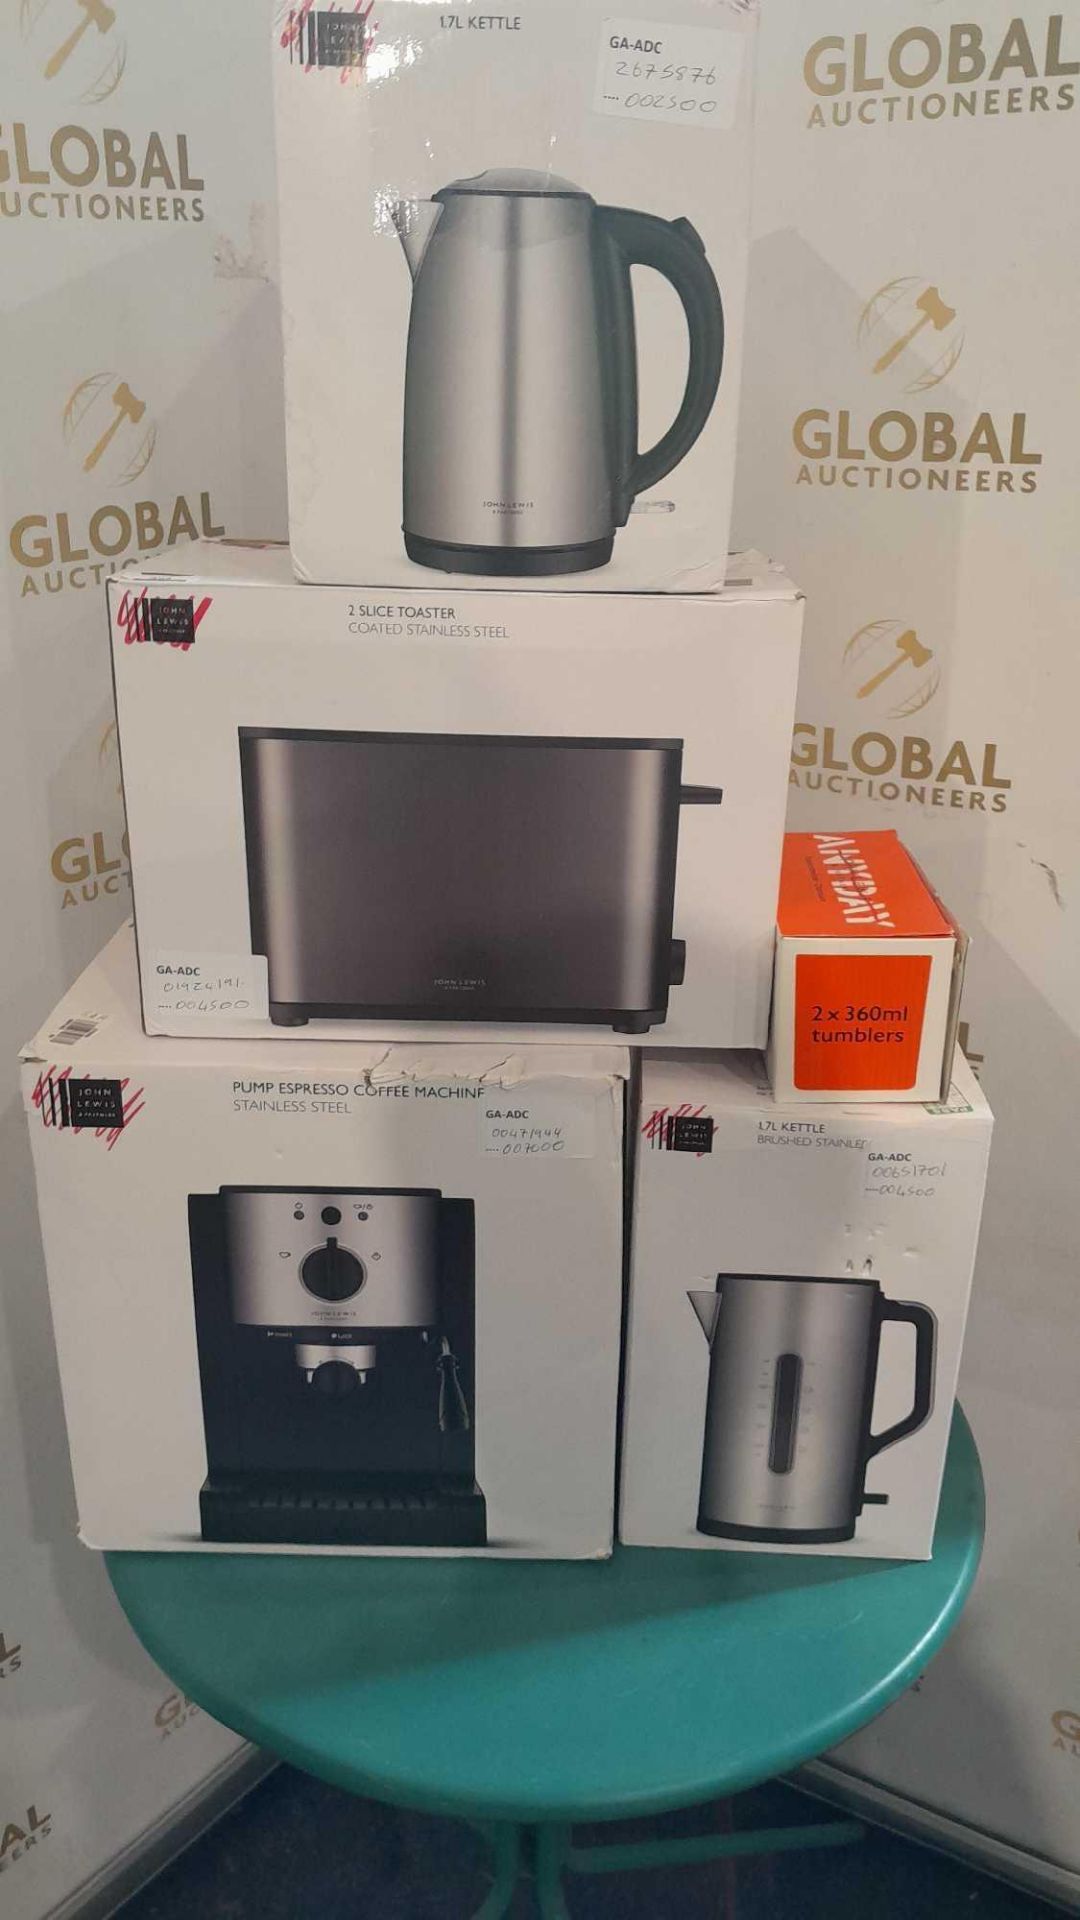 RRP £200 Lot To Contain 5 Items Such As 1 John Lewis Pump Espresso Coffee Machine (Stainless Steal)